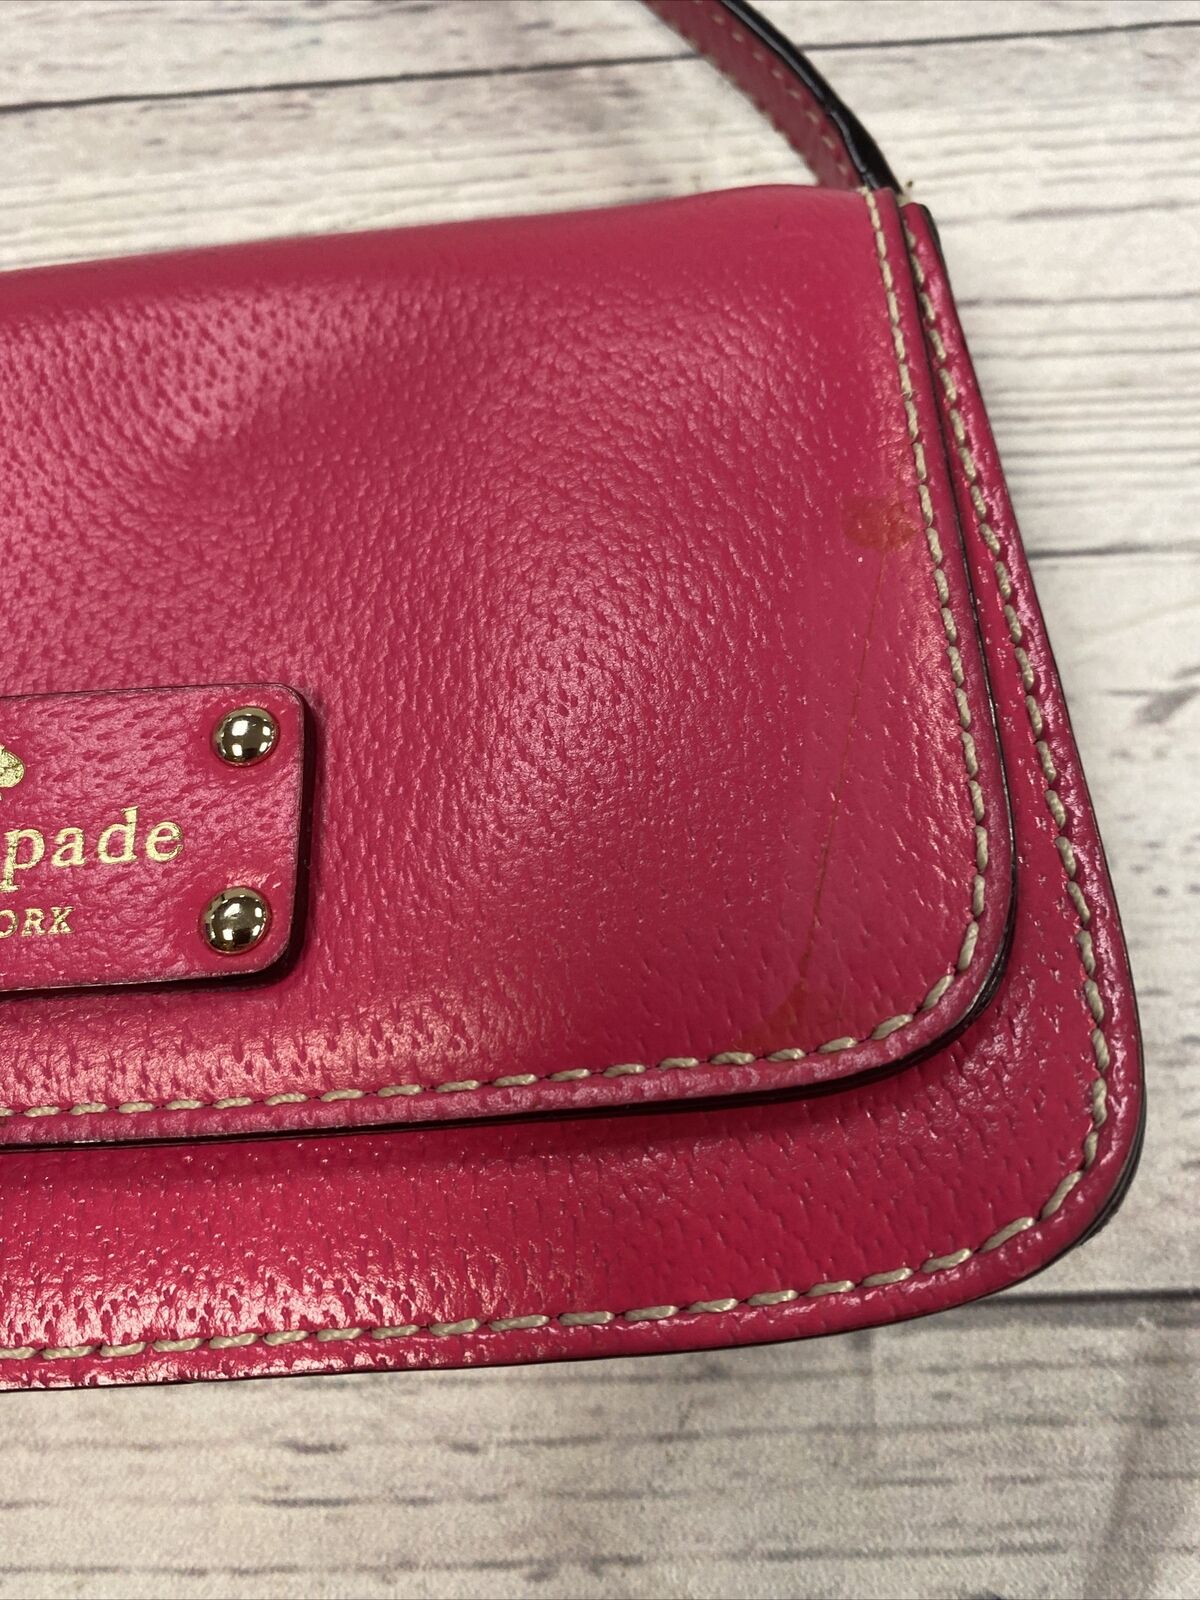 Kate Spade Wellesley Small Quinn Square crossbody